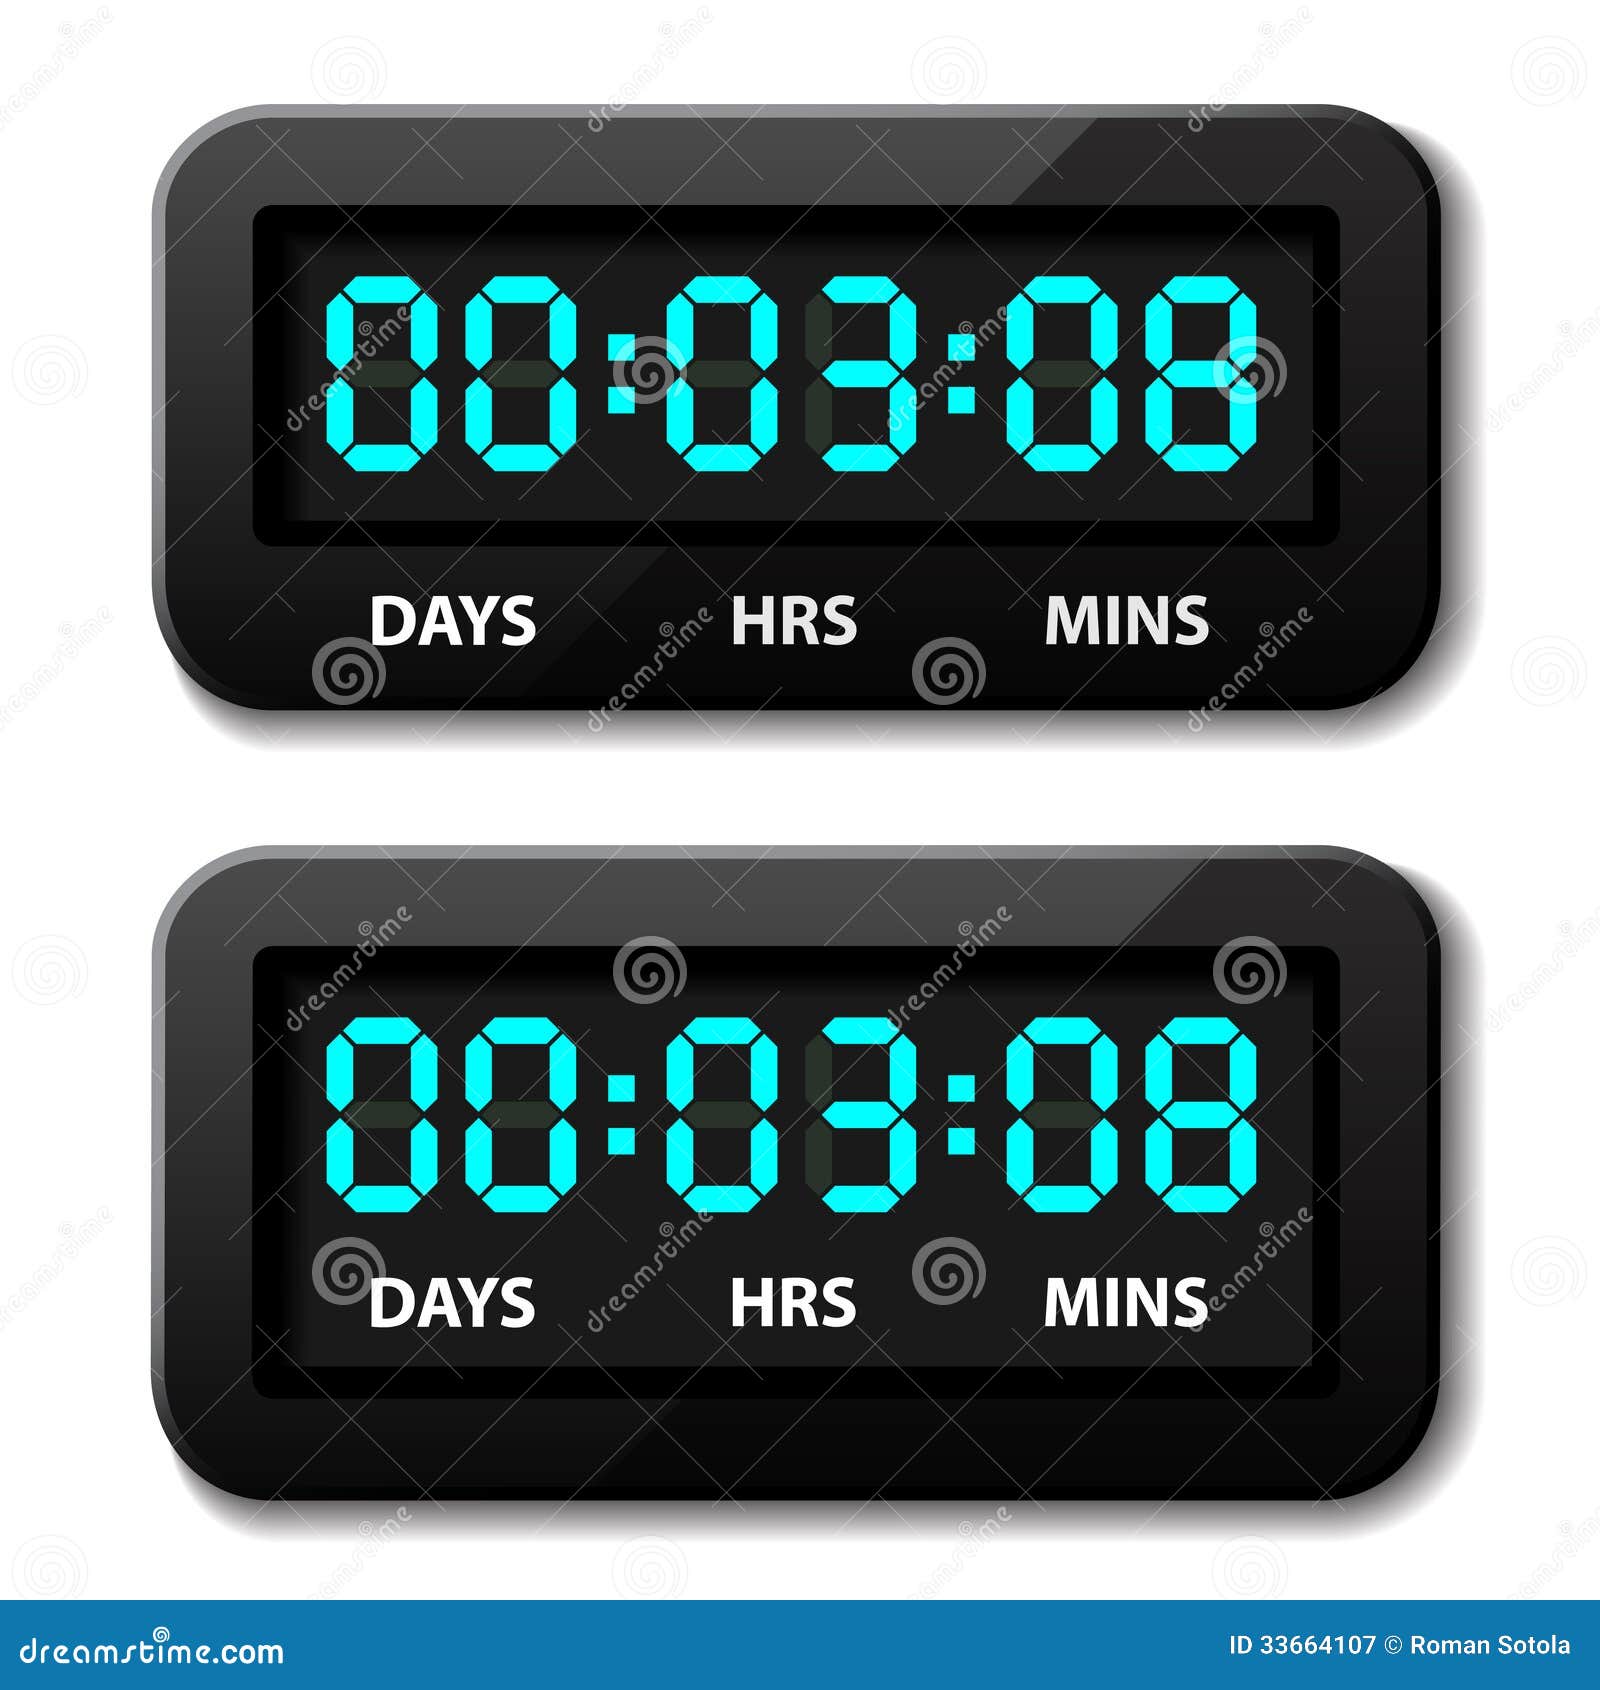 Glowing Digital Counter - Countdown Timer Royalty Free Stock Photography - Image: 33664107